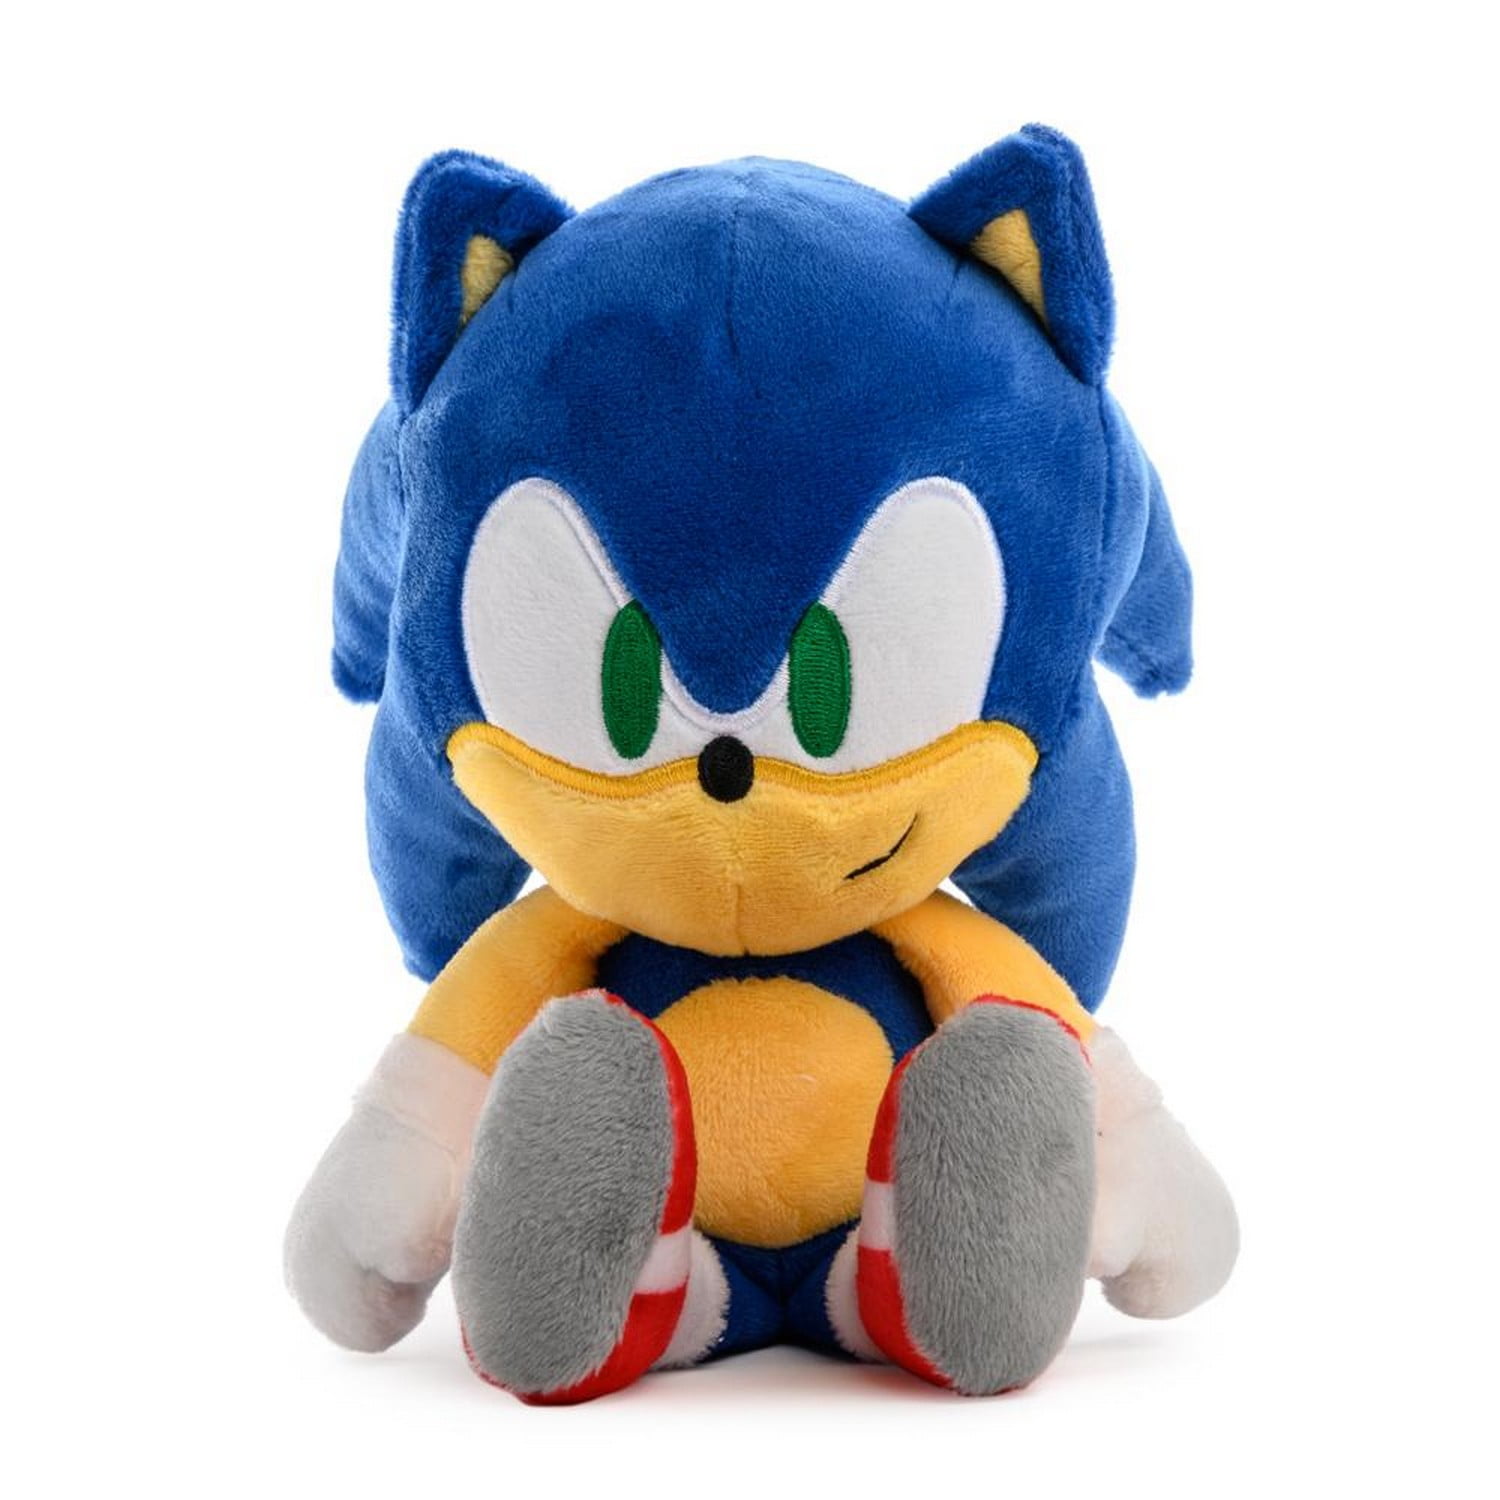 LOVELY Sonic the Hedgehog 6 inch stuffed plush gift toy 